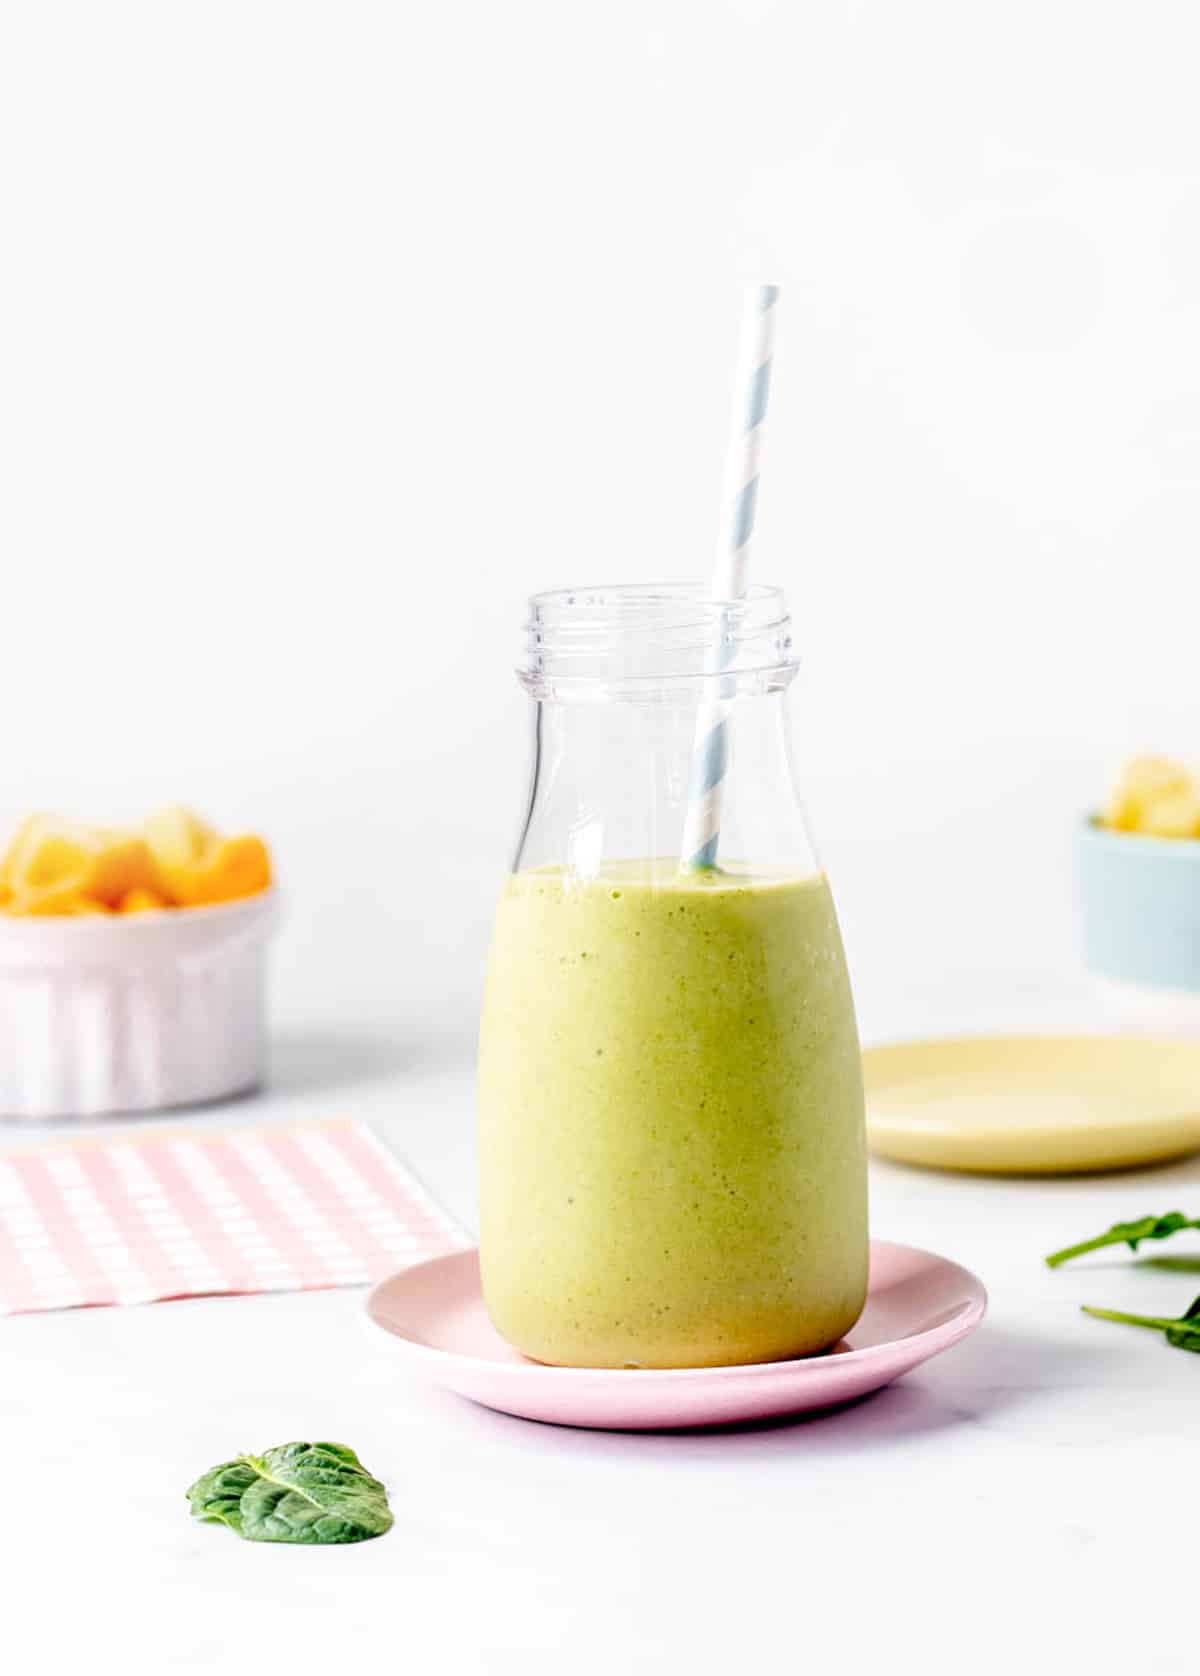 A milk bottle filled with green smoothie without yogurt or banana.